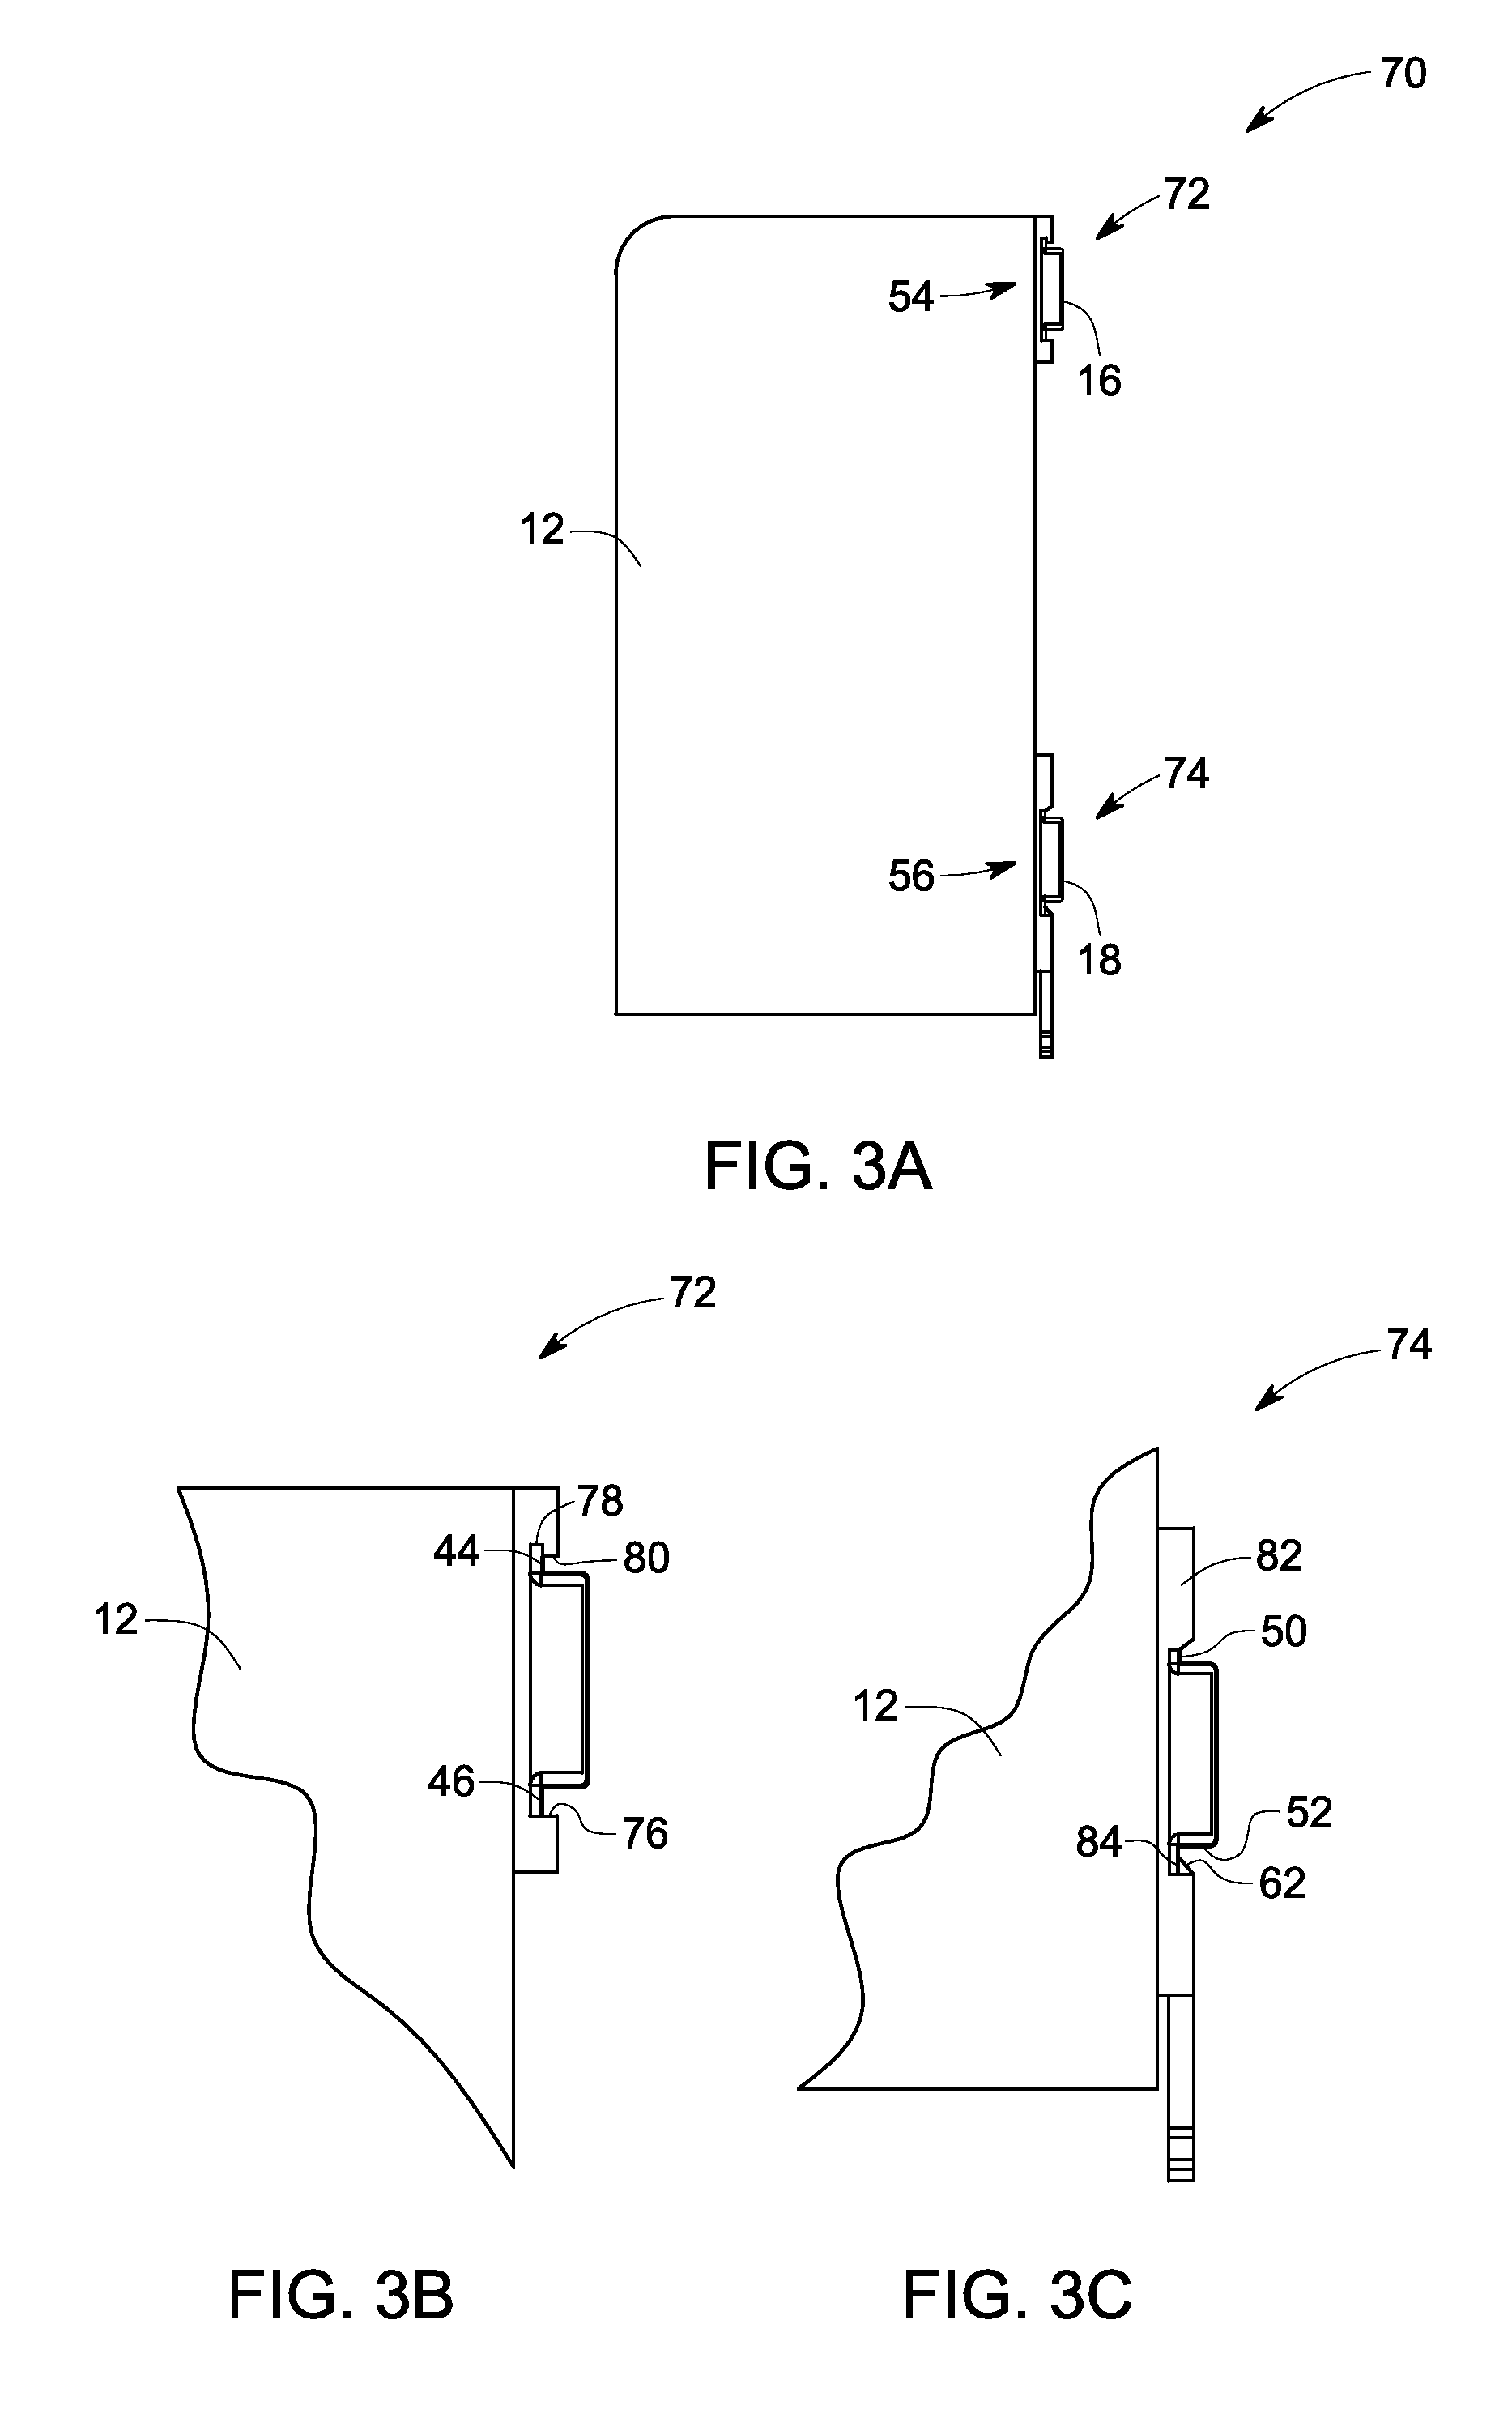 System for securing a device using two din rails